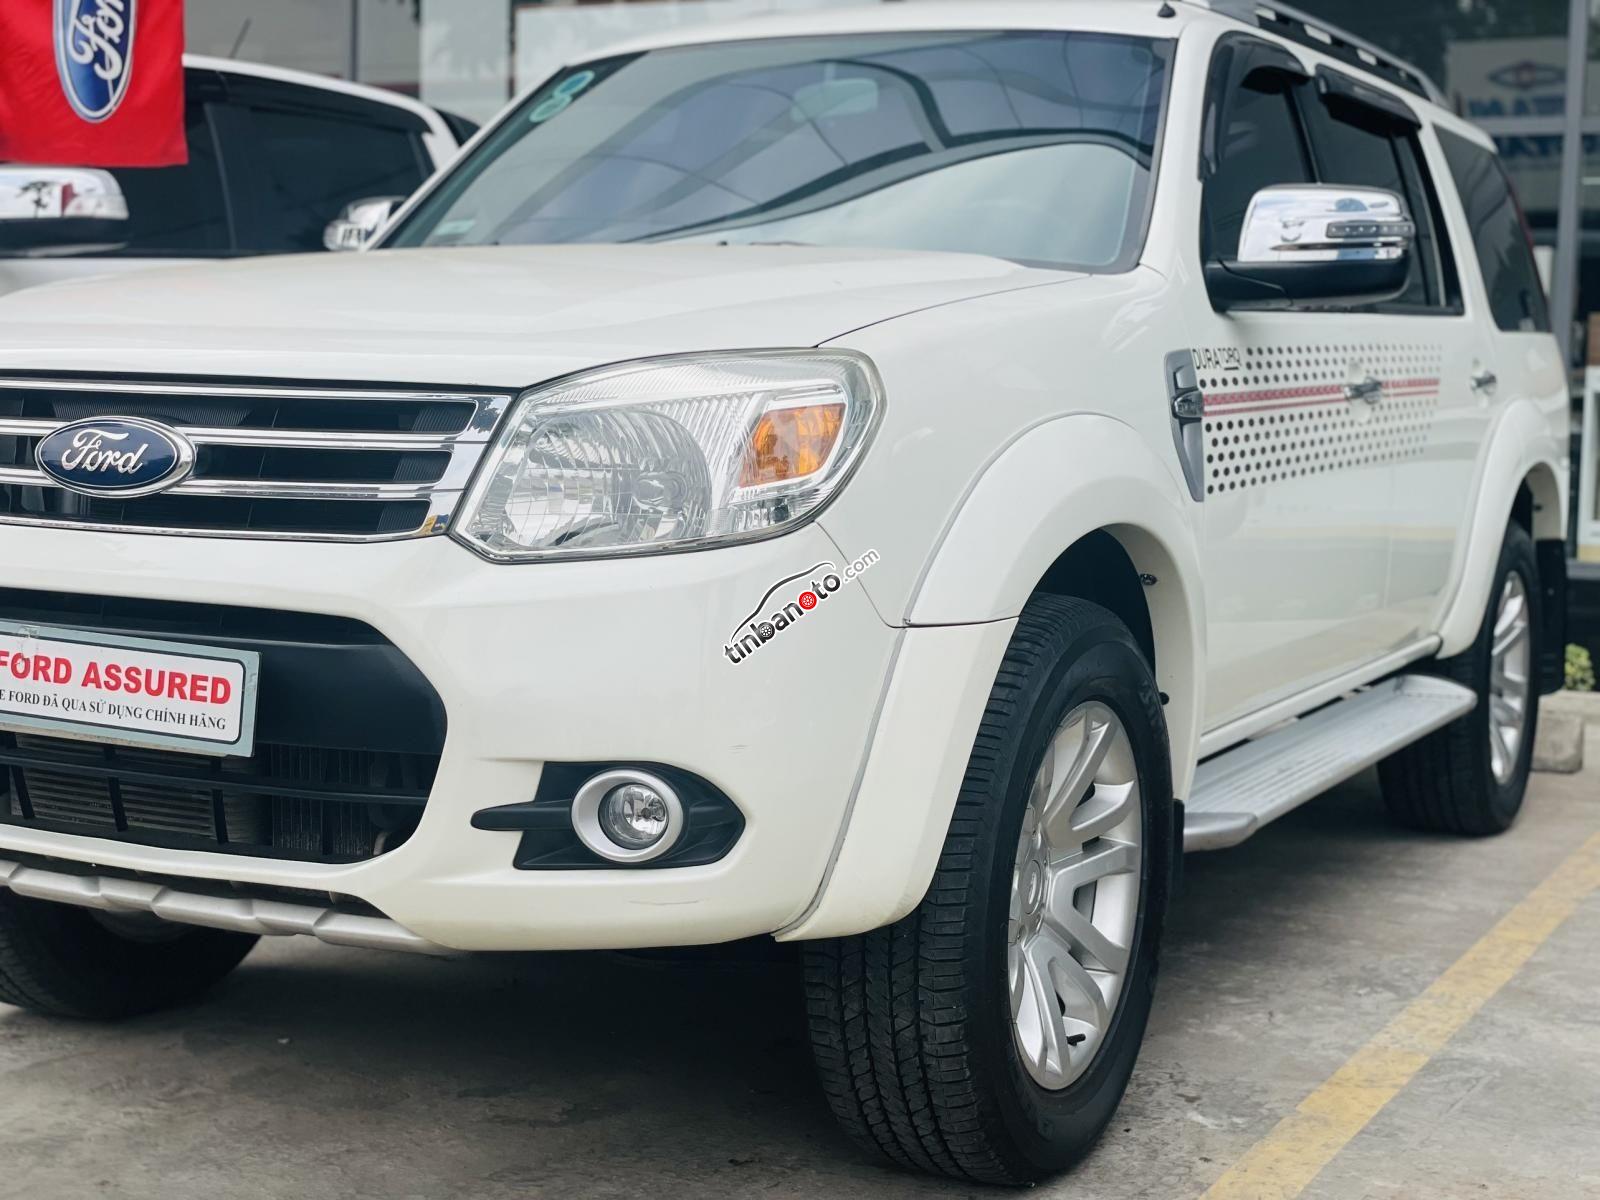 ban oto Lap rap trong nuoc Ford Everest  2013